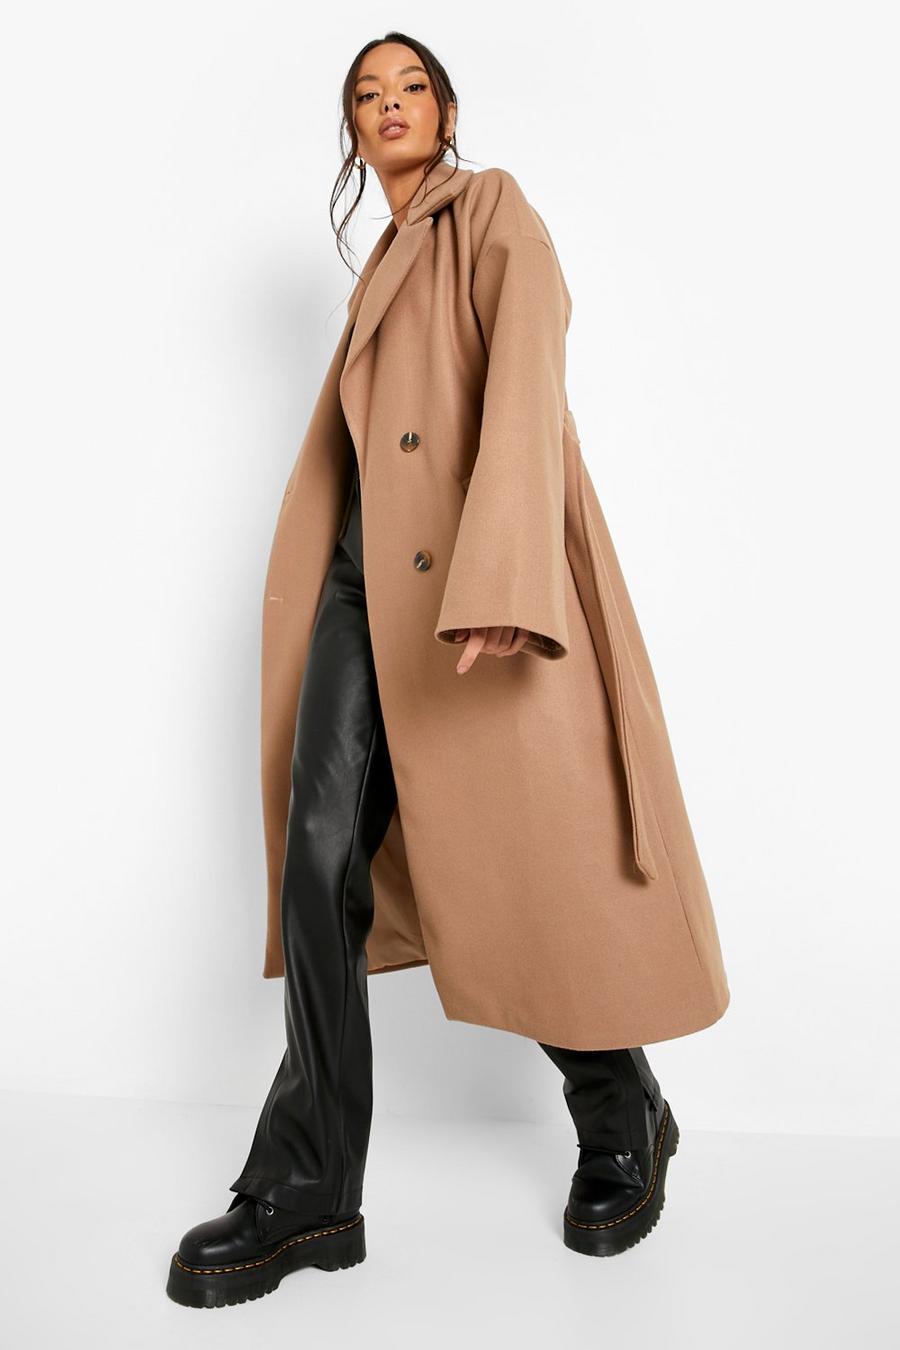 Boohoo Lillie Bonded Short Trench NWT Camel 